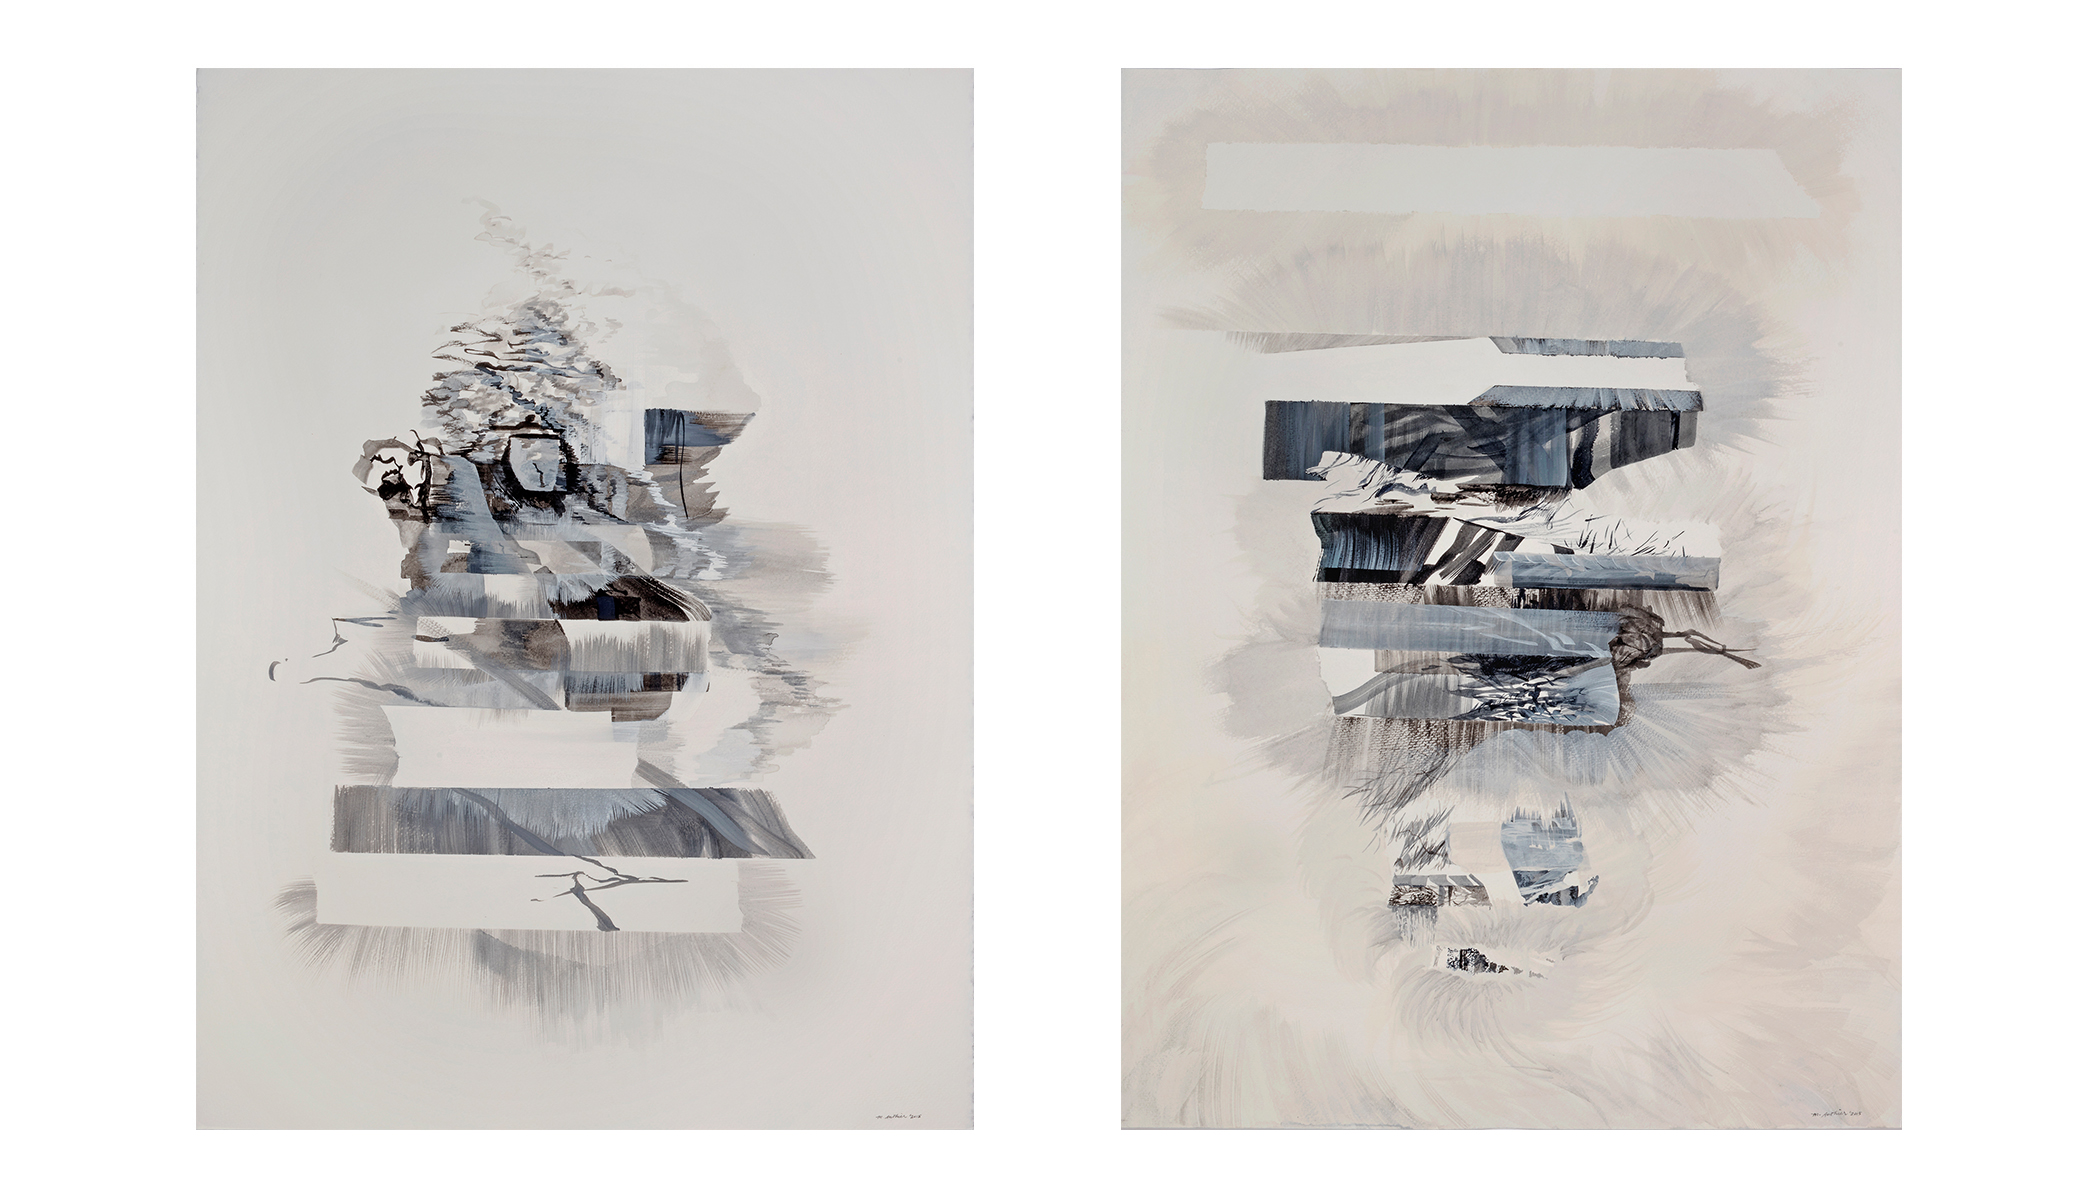   Vestiges and Thieveries - diptych, 2015    watercolour and ink on paper  30" x 44" 